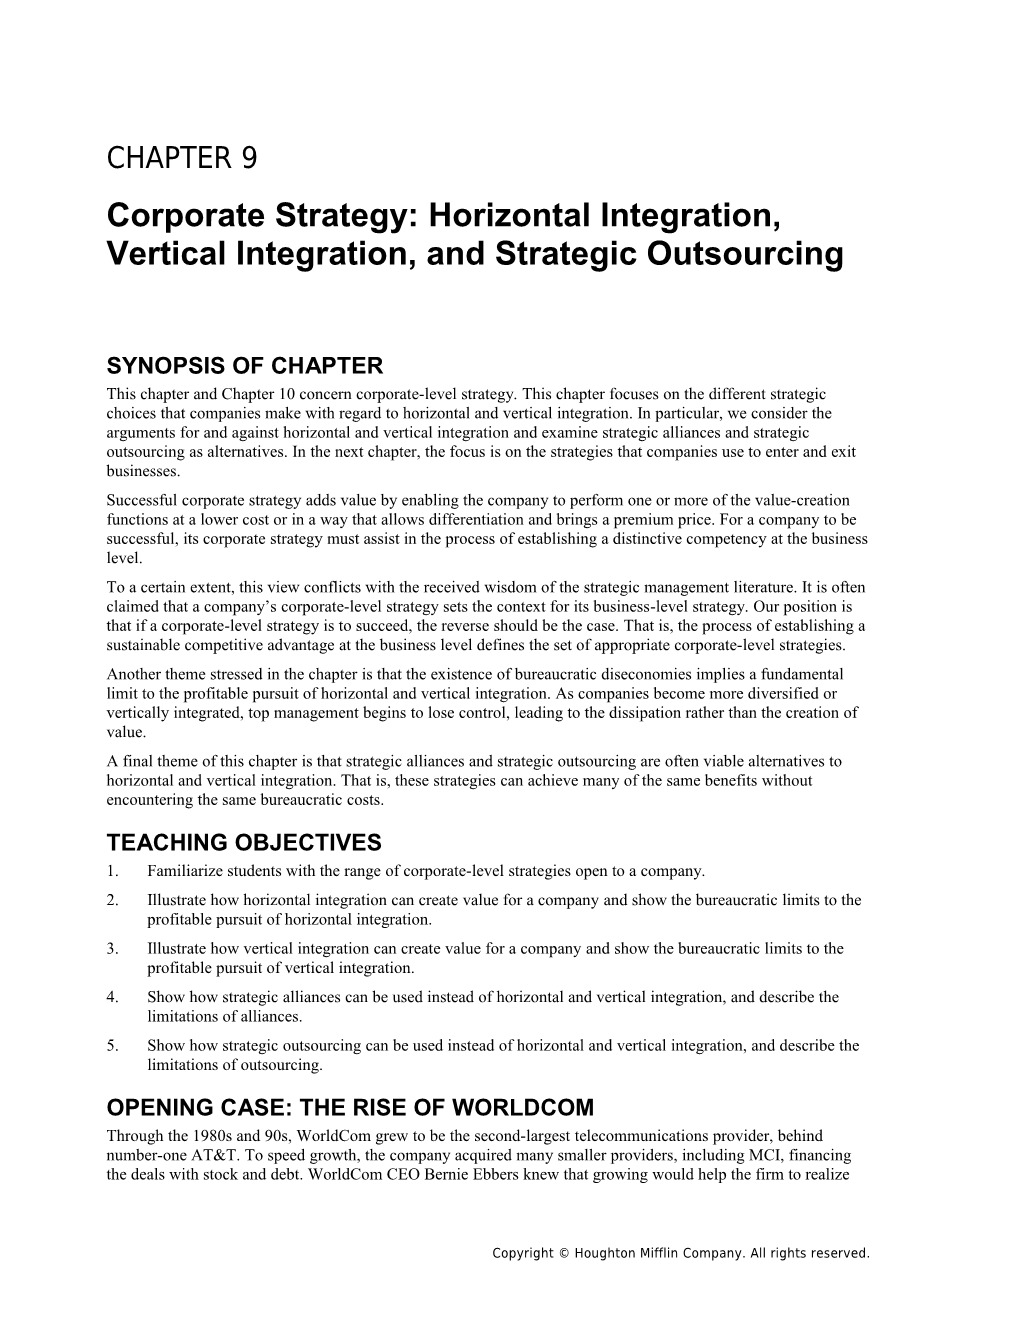 Chapter 9: Corporate Strategy: Horizontal and Vertical Integration, and Outsourcing1